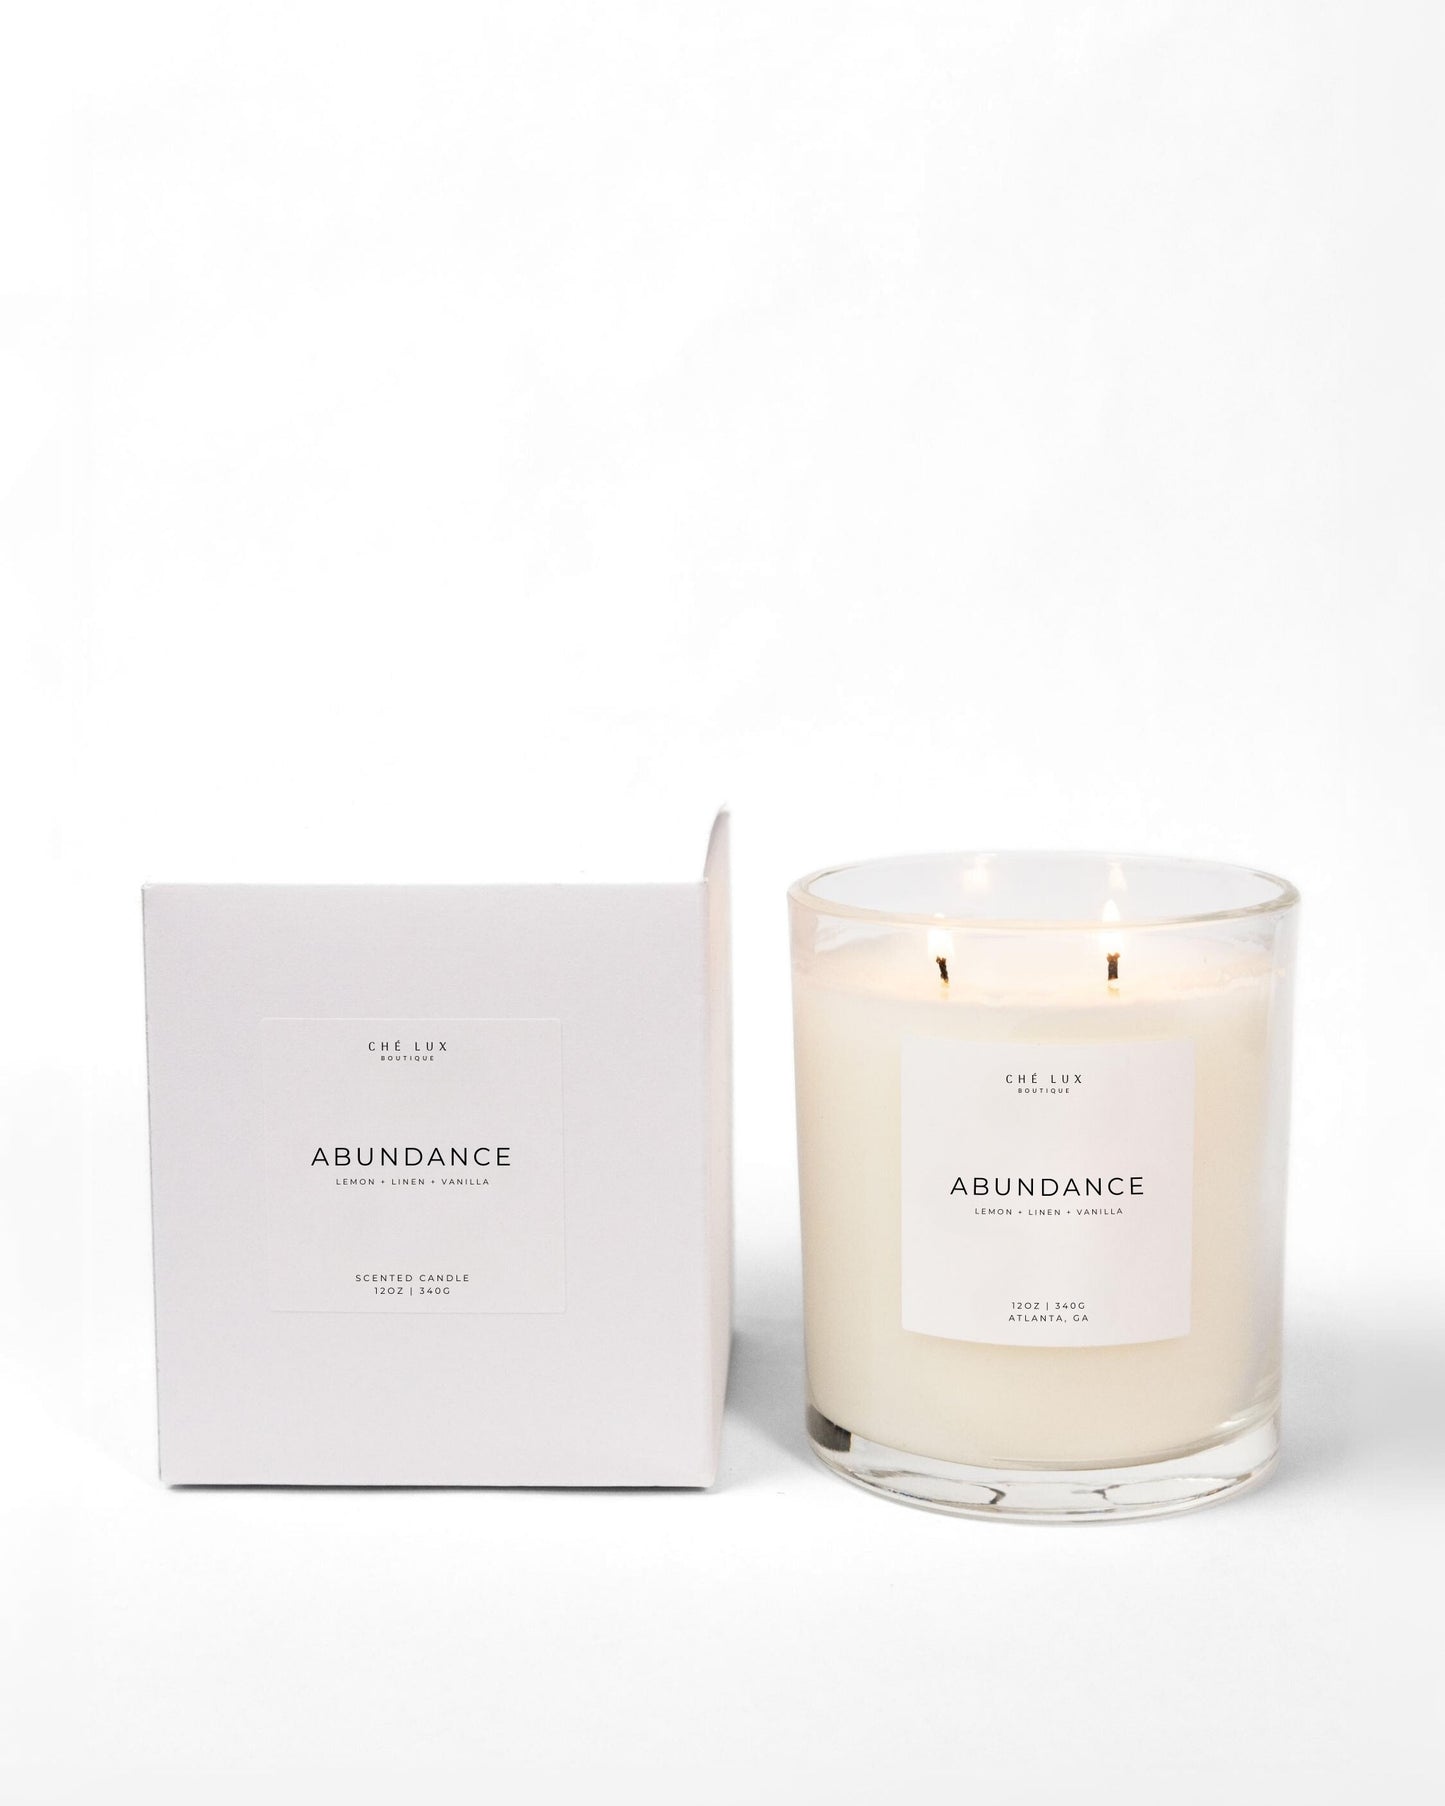 New Beginnings is a Fresh & Floral Fragrance. Floral powerhouse with its marriage of magnolia, peony, and cherry blossom.   Fragrance Notes: cherry blossom, magnolia, peony